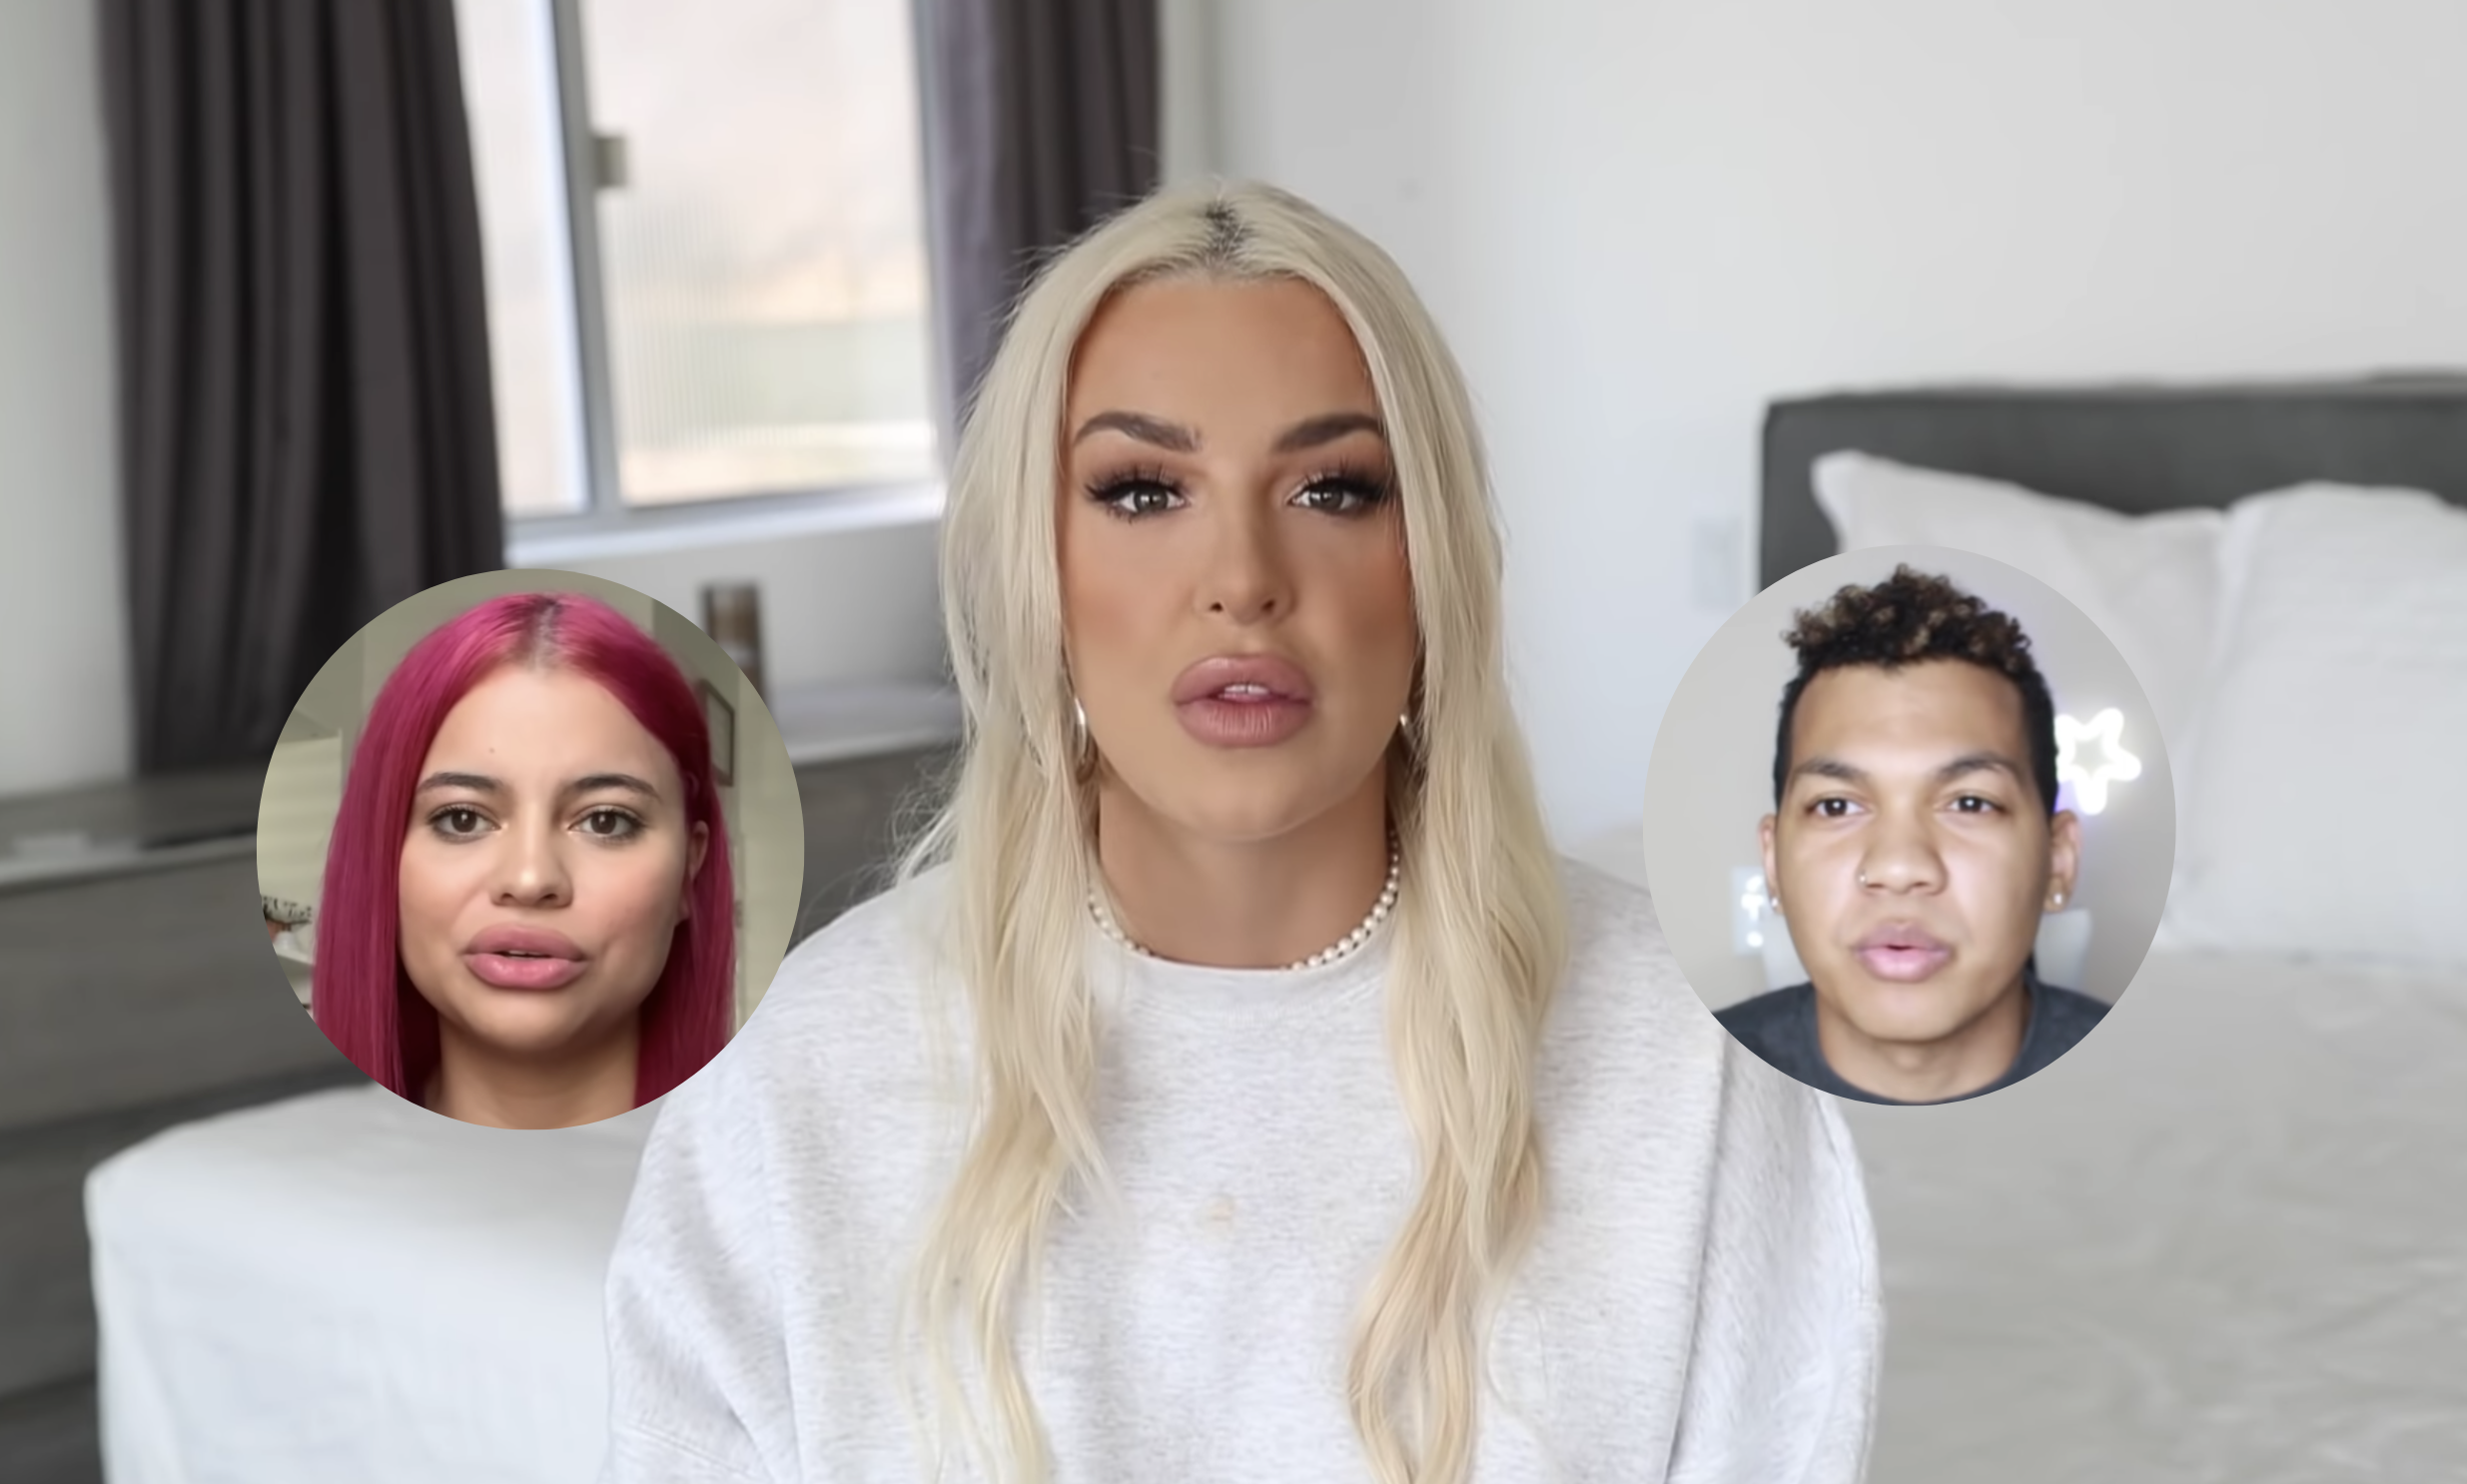 Tana Mongeau addressed both Kahlen Barry and Simply Nessa in her apology vi...